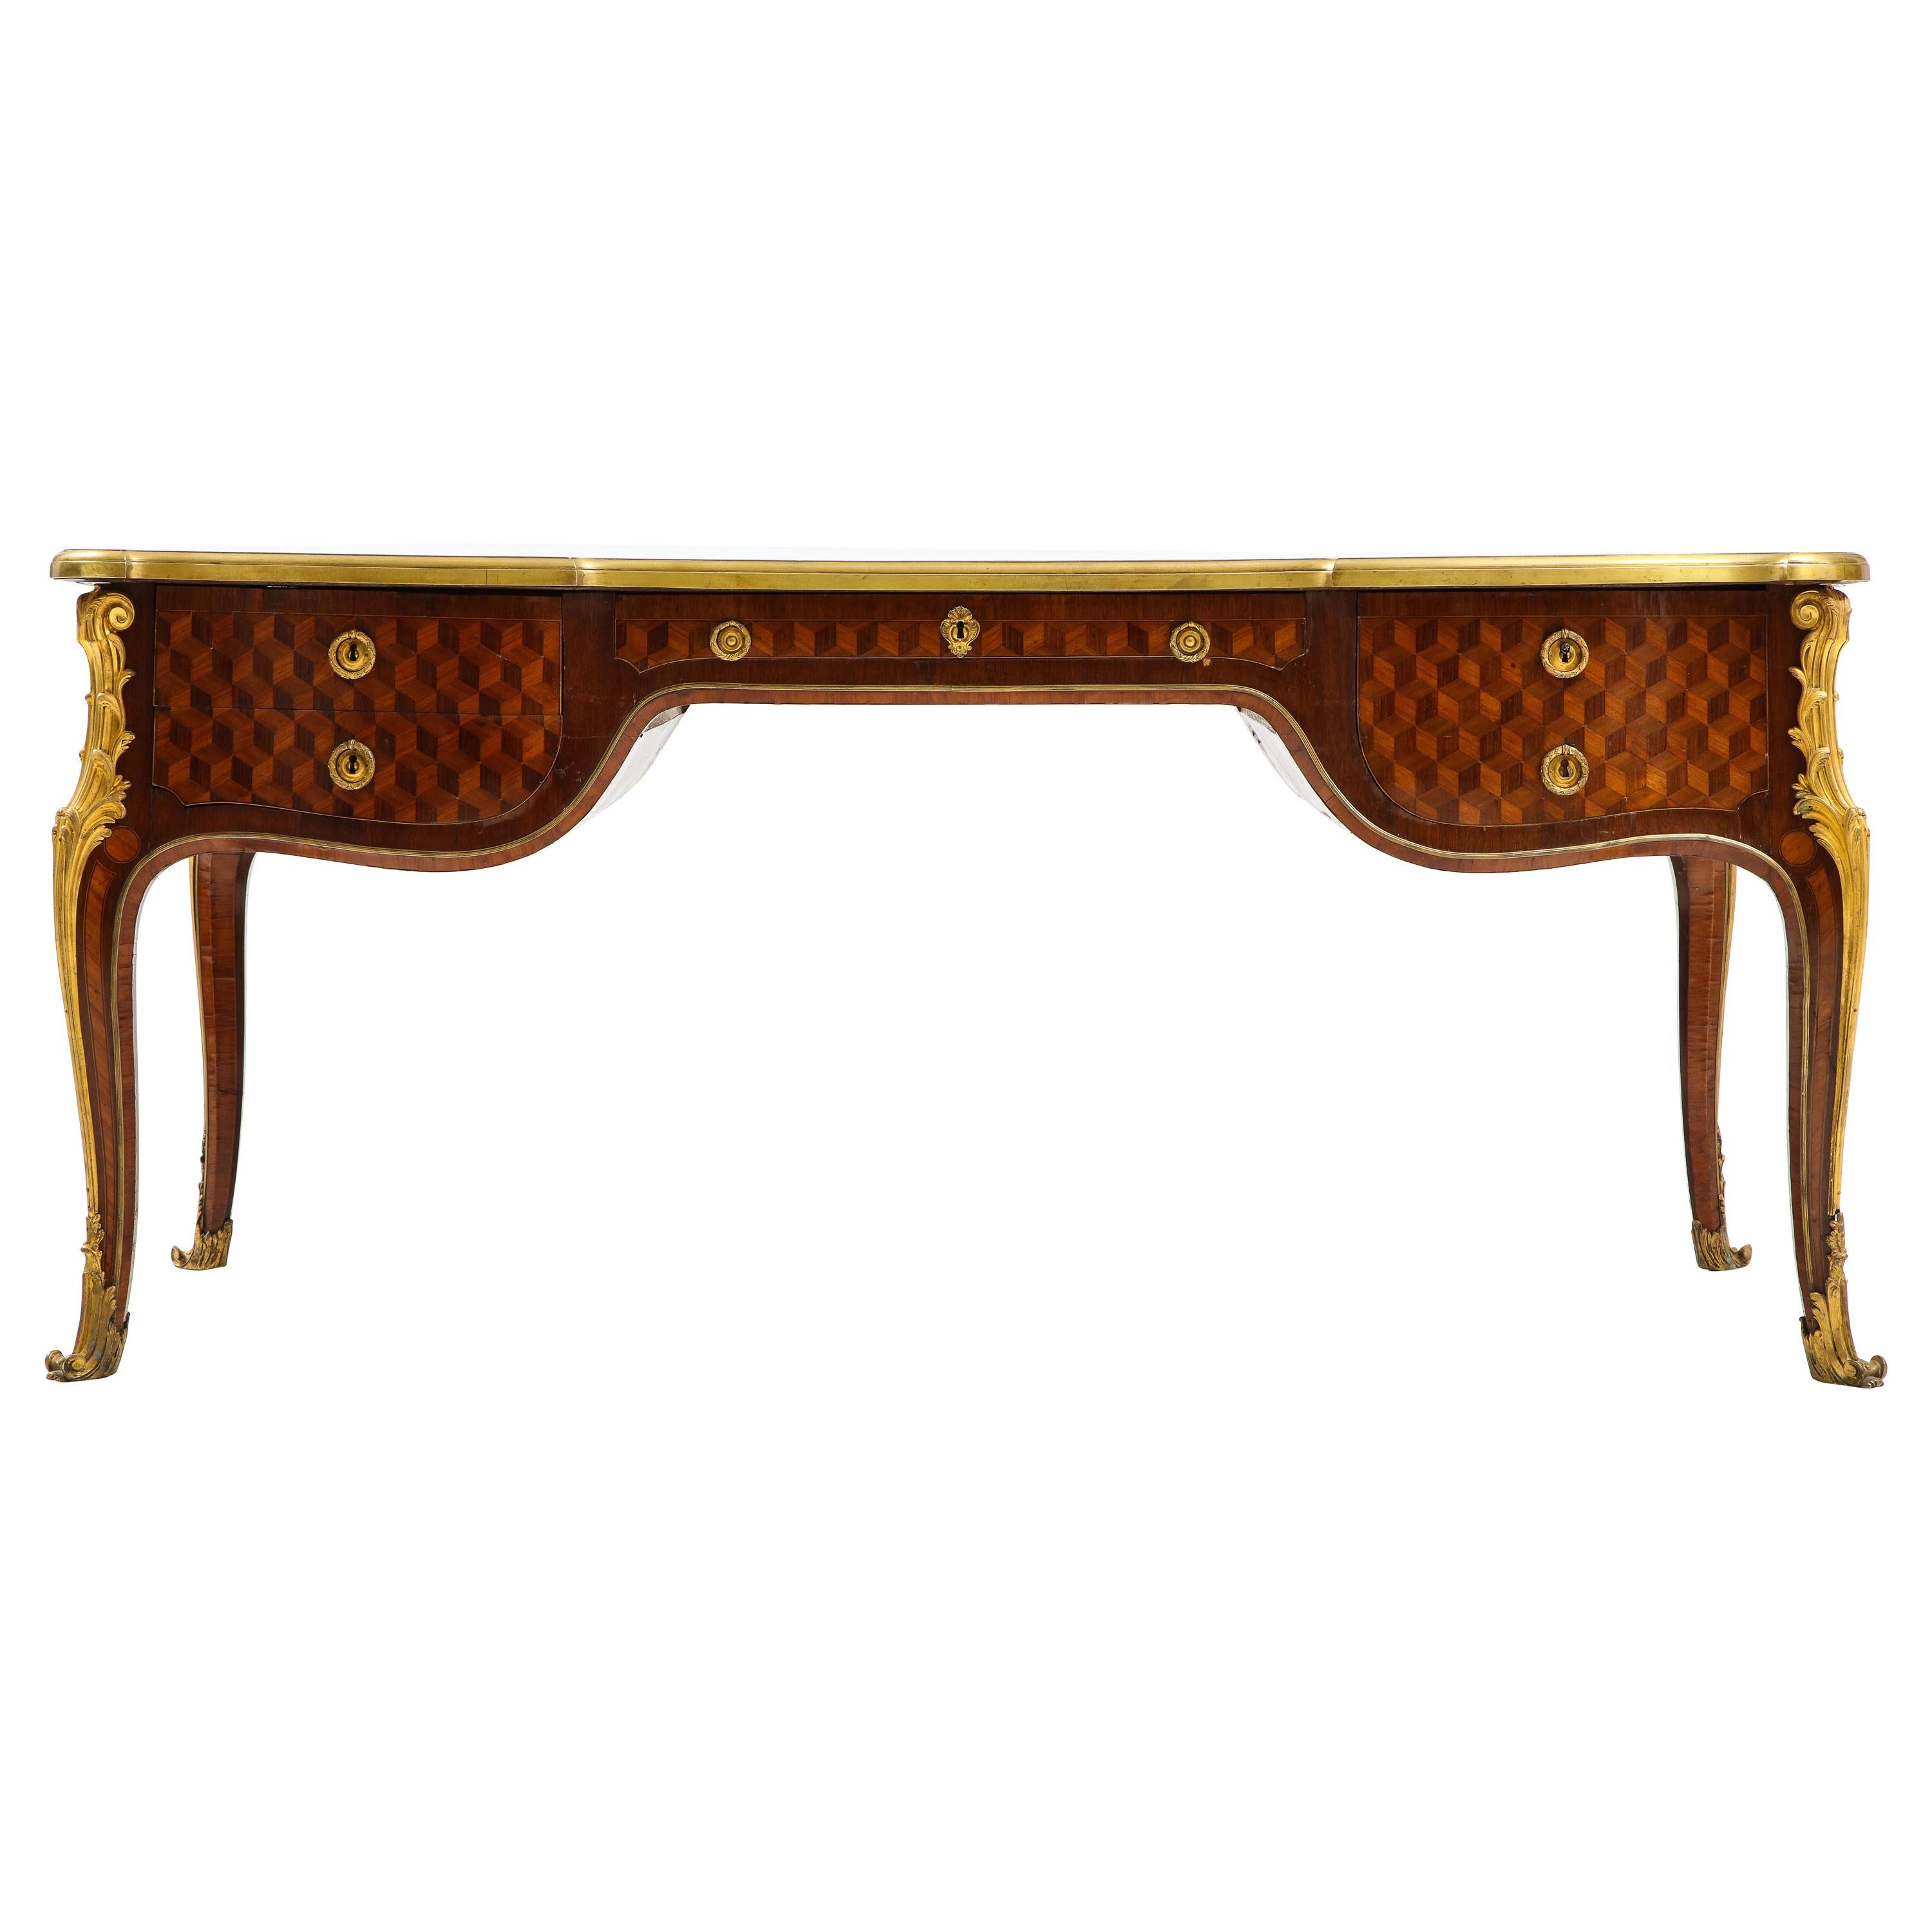 Fine Louis XV Style Marquetry Bureau Plat Attributed to François Linke